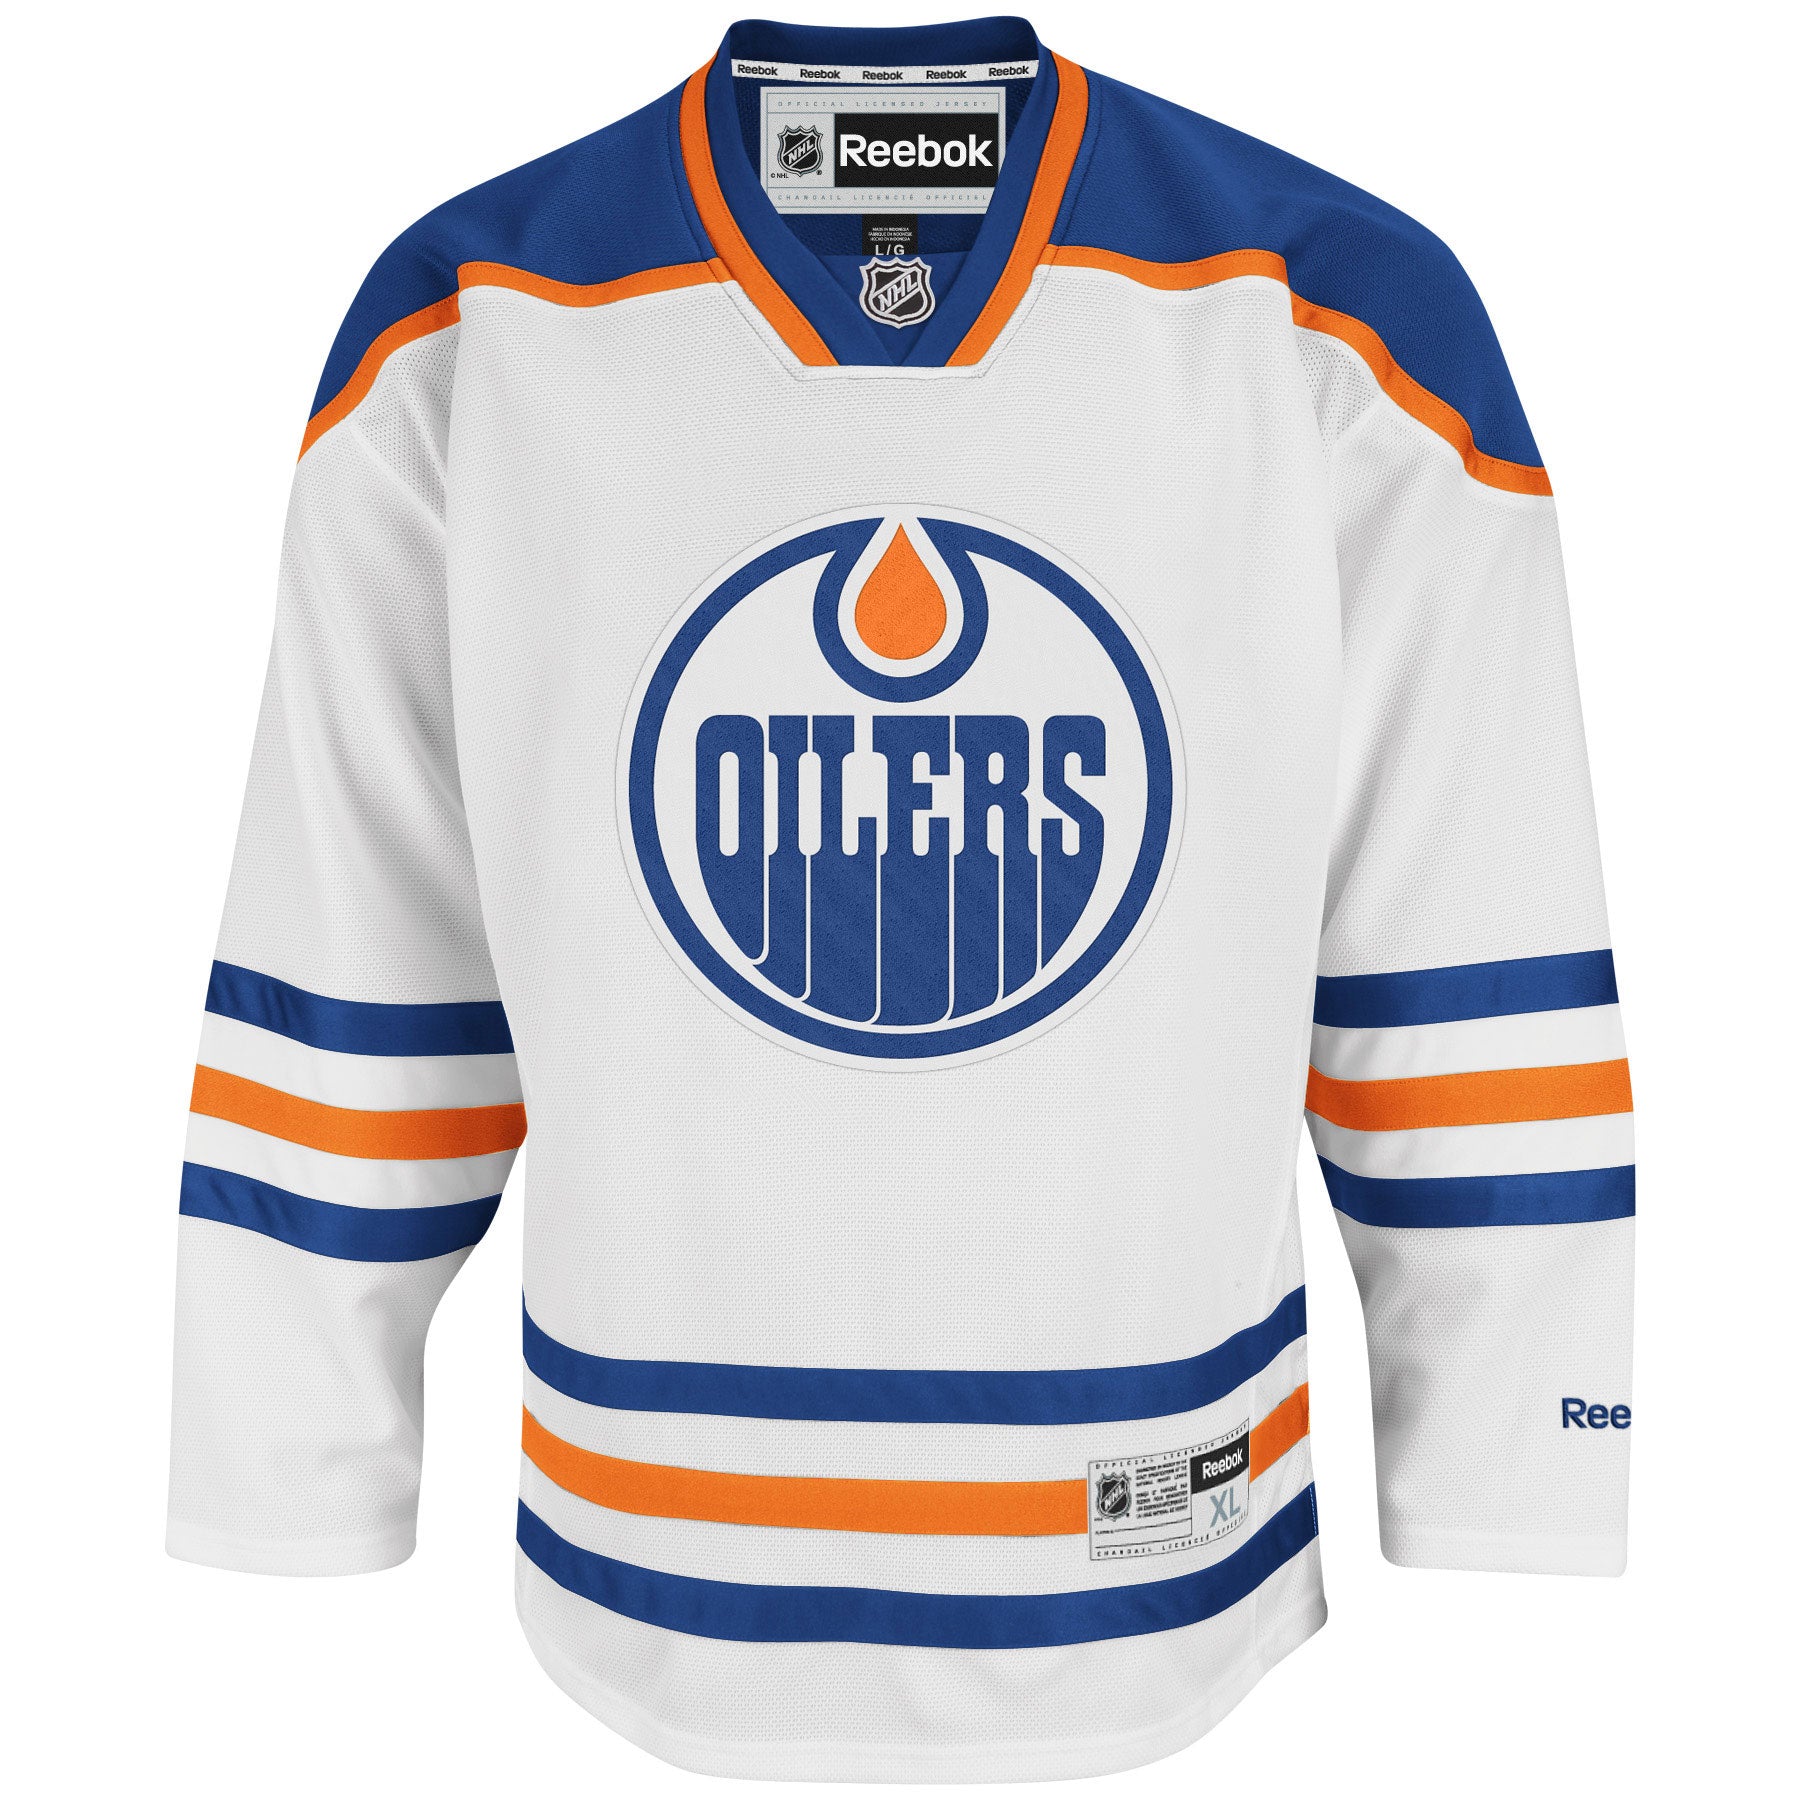 Edmonton Oilers - NEW BLUE & WHITE JERSEYS AVAILABLE THIS